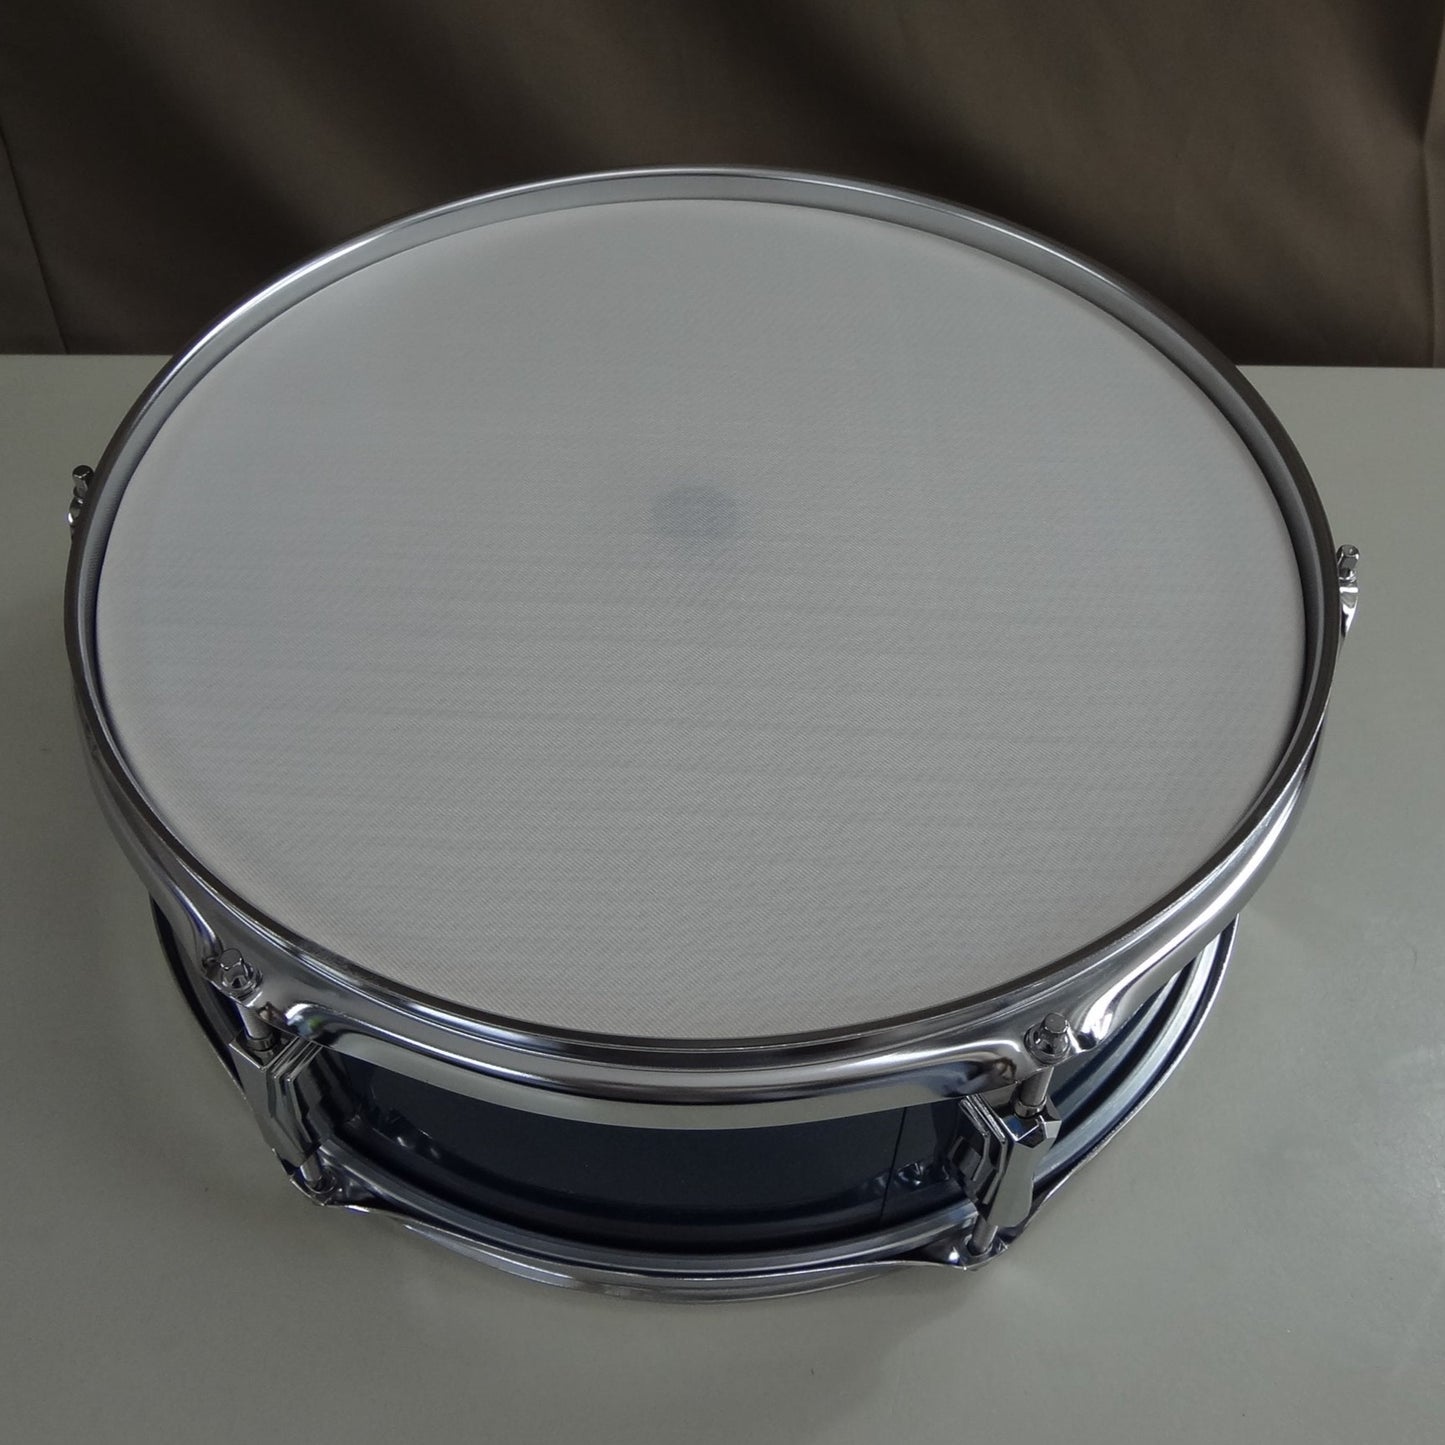 New 14 Inch Custom Electronic Snare Drum - Blue Sparkle